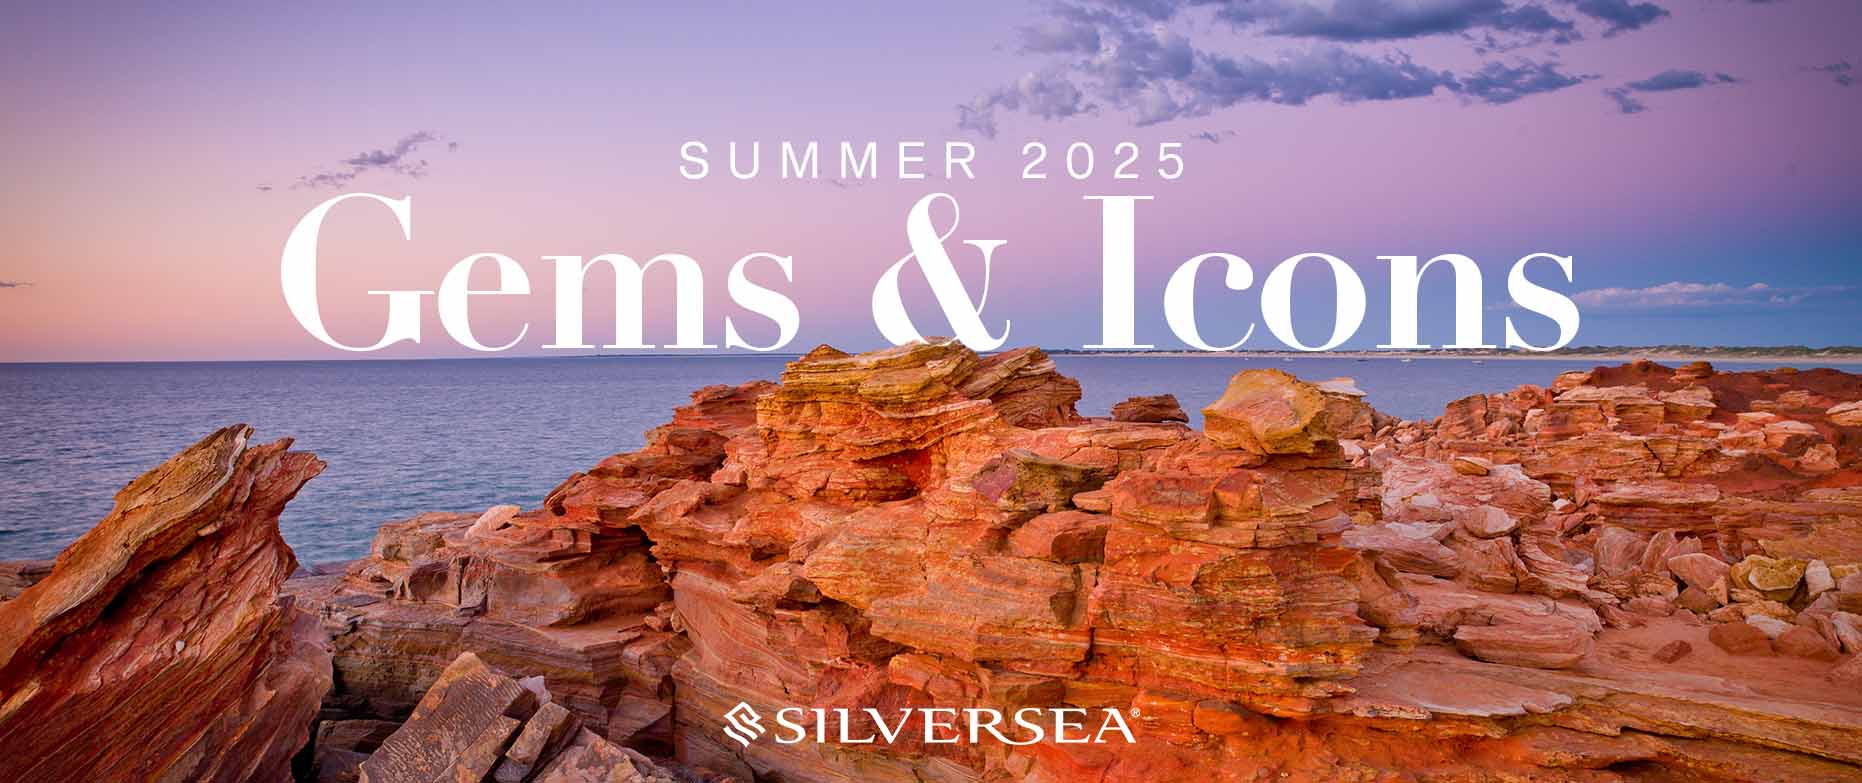 Silversea Cruises Summer 2025 Voyages The Cruise Line